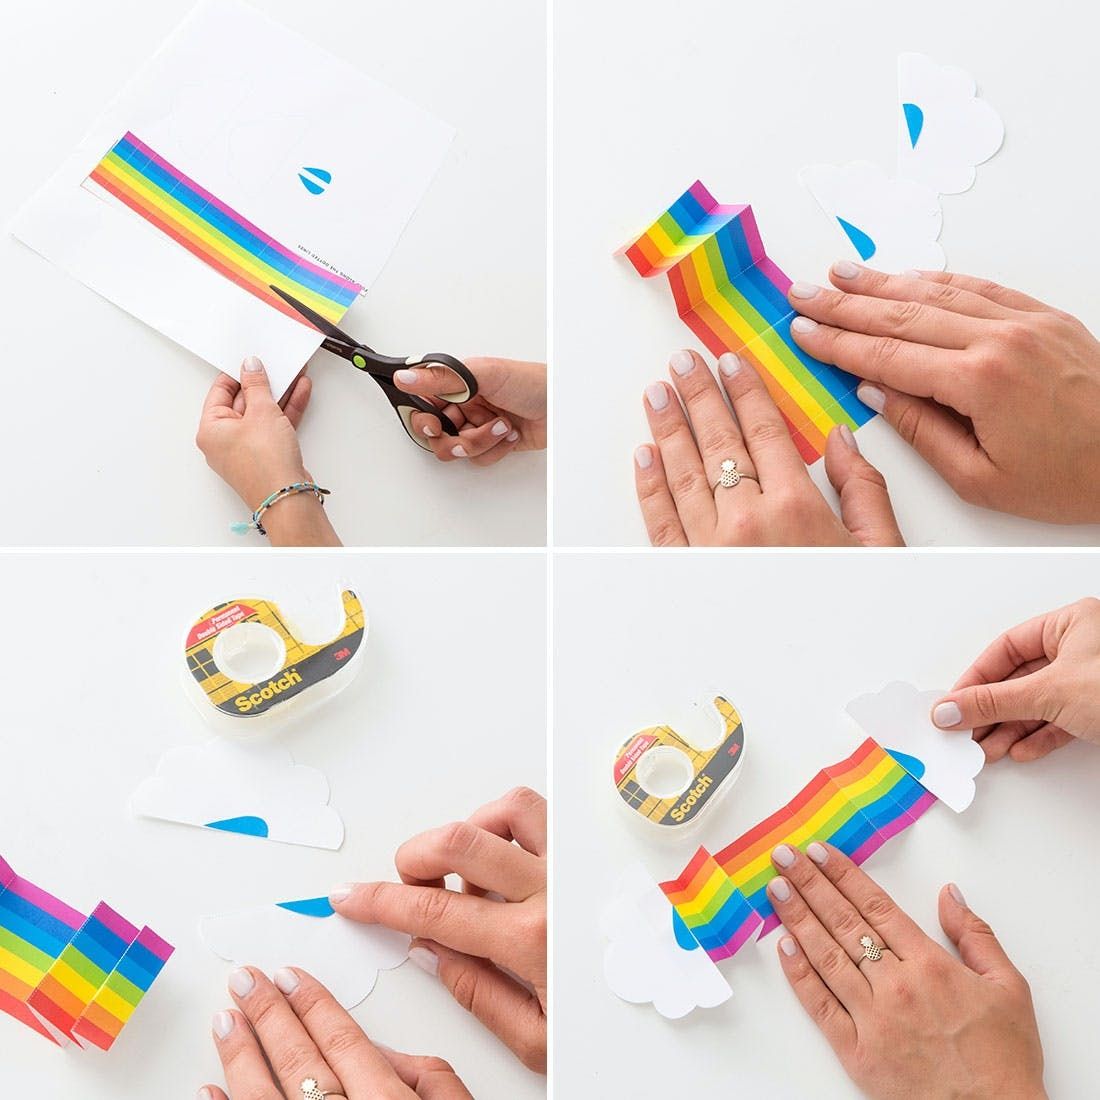 Throw the Ultimate Rainbow Party With These 8 Colorful DIYs - Brit + Co